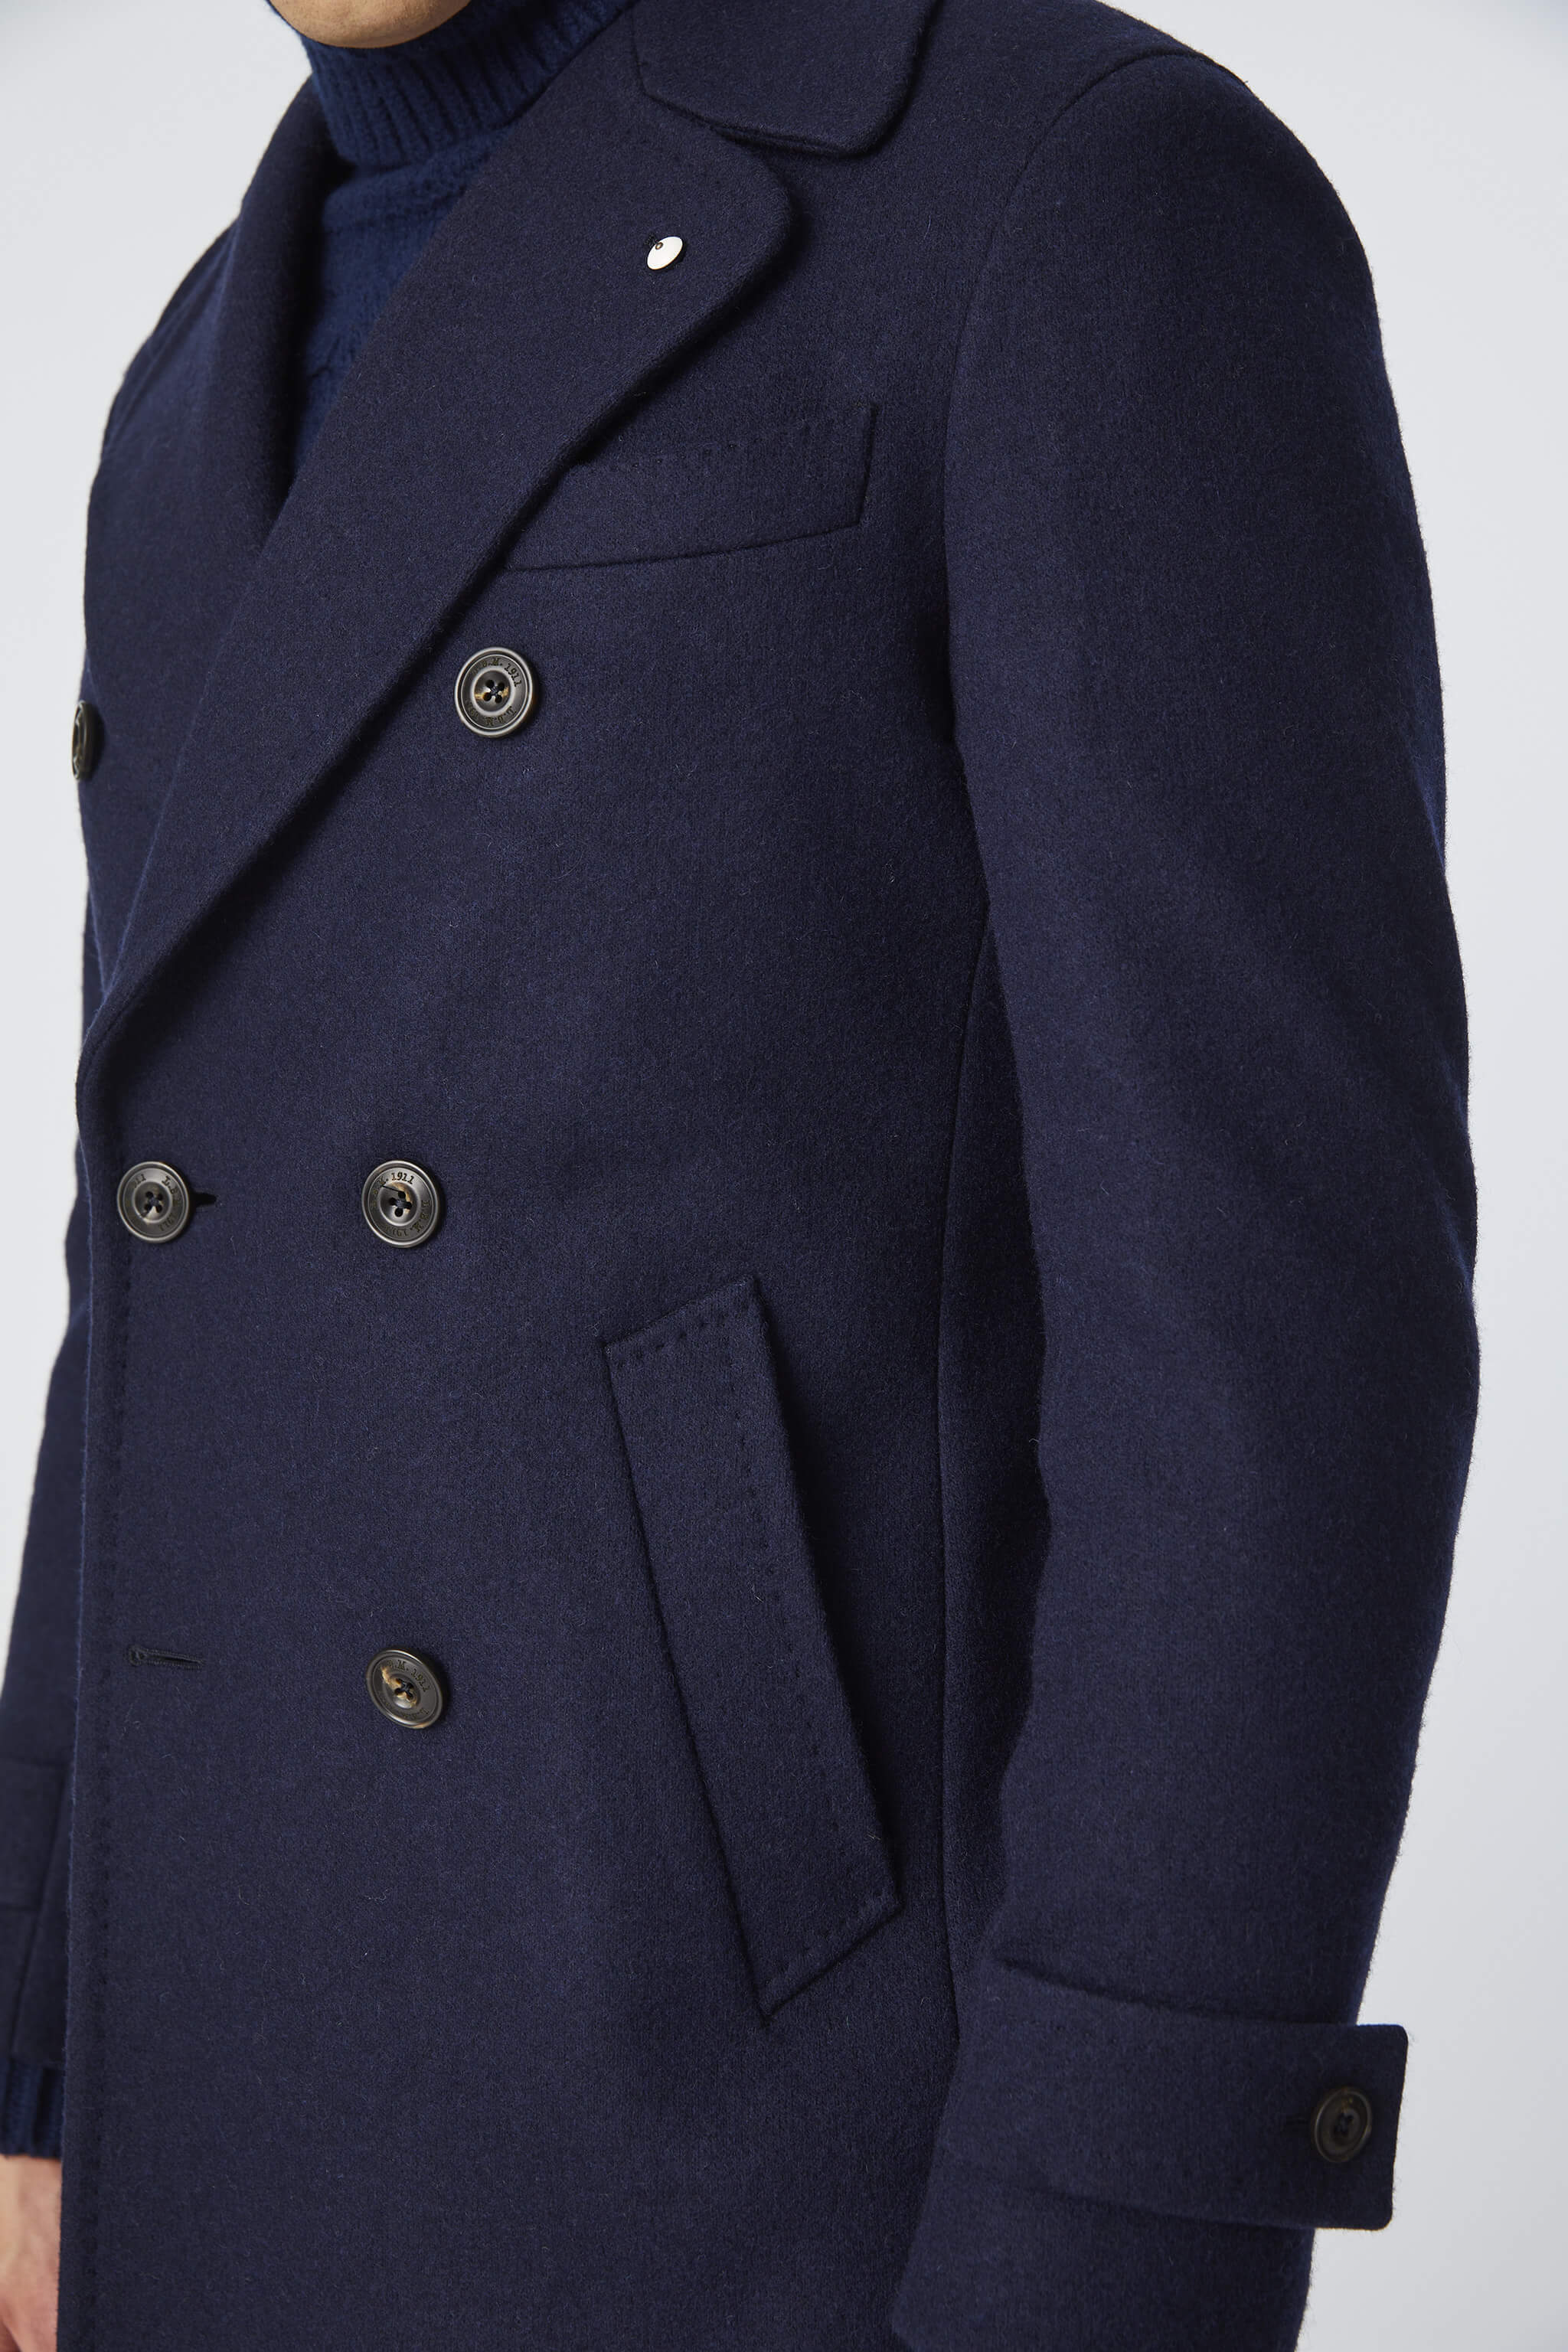 Chesterfield coat in midnight blue jersey